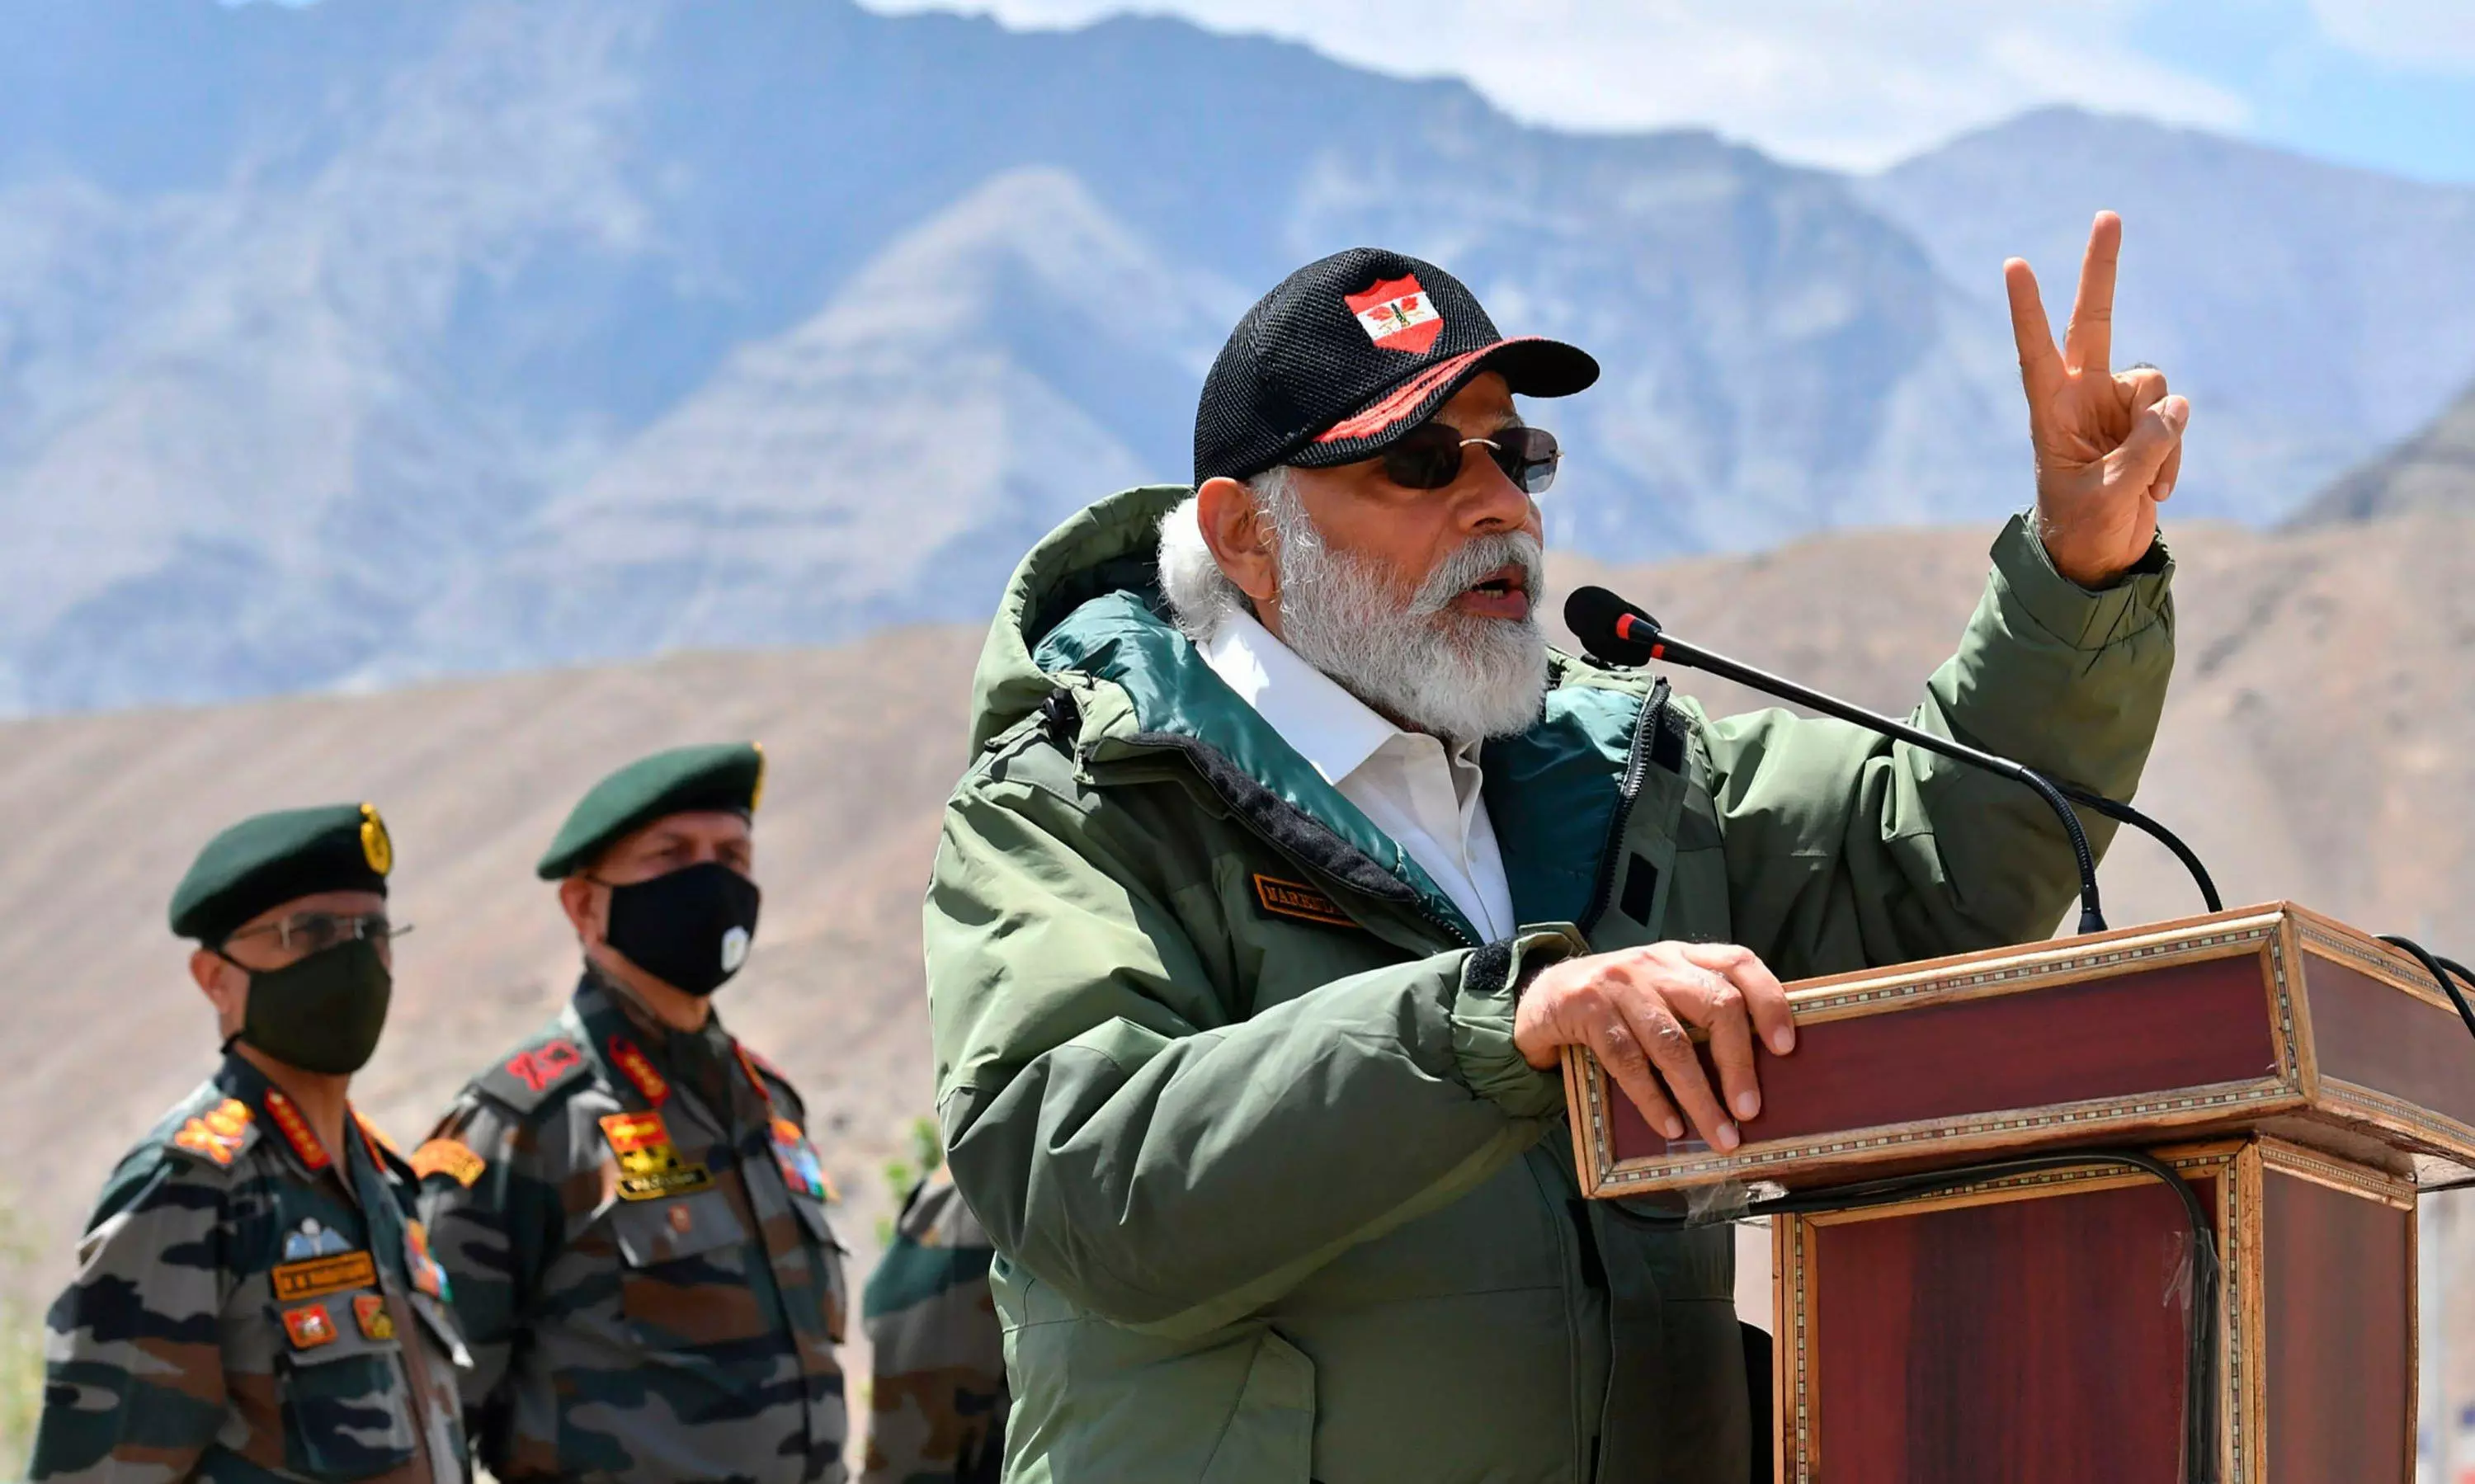 PM Modis Jolingkong visit to boost morale of security forces, people of border villages